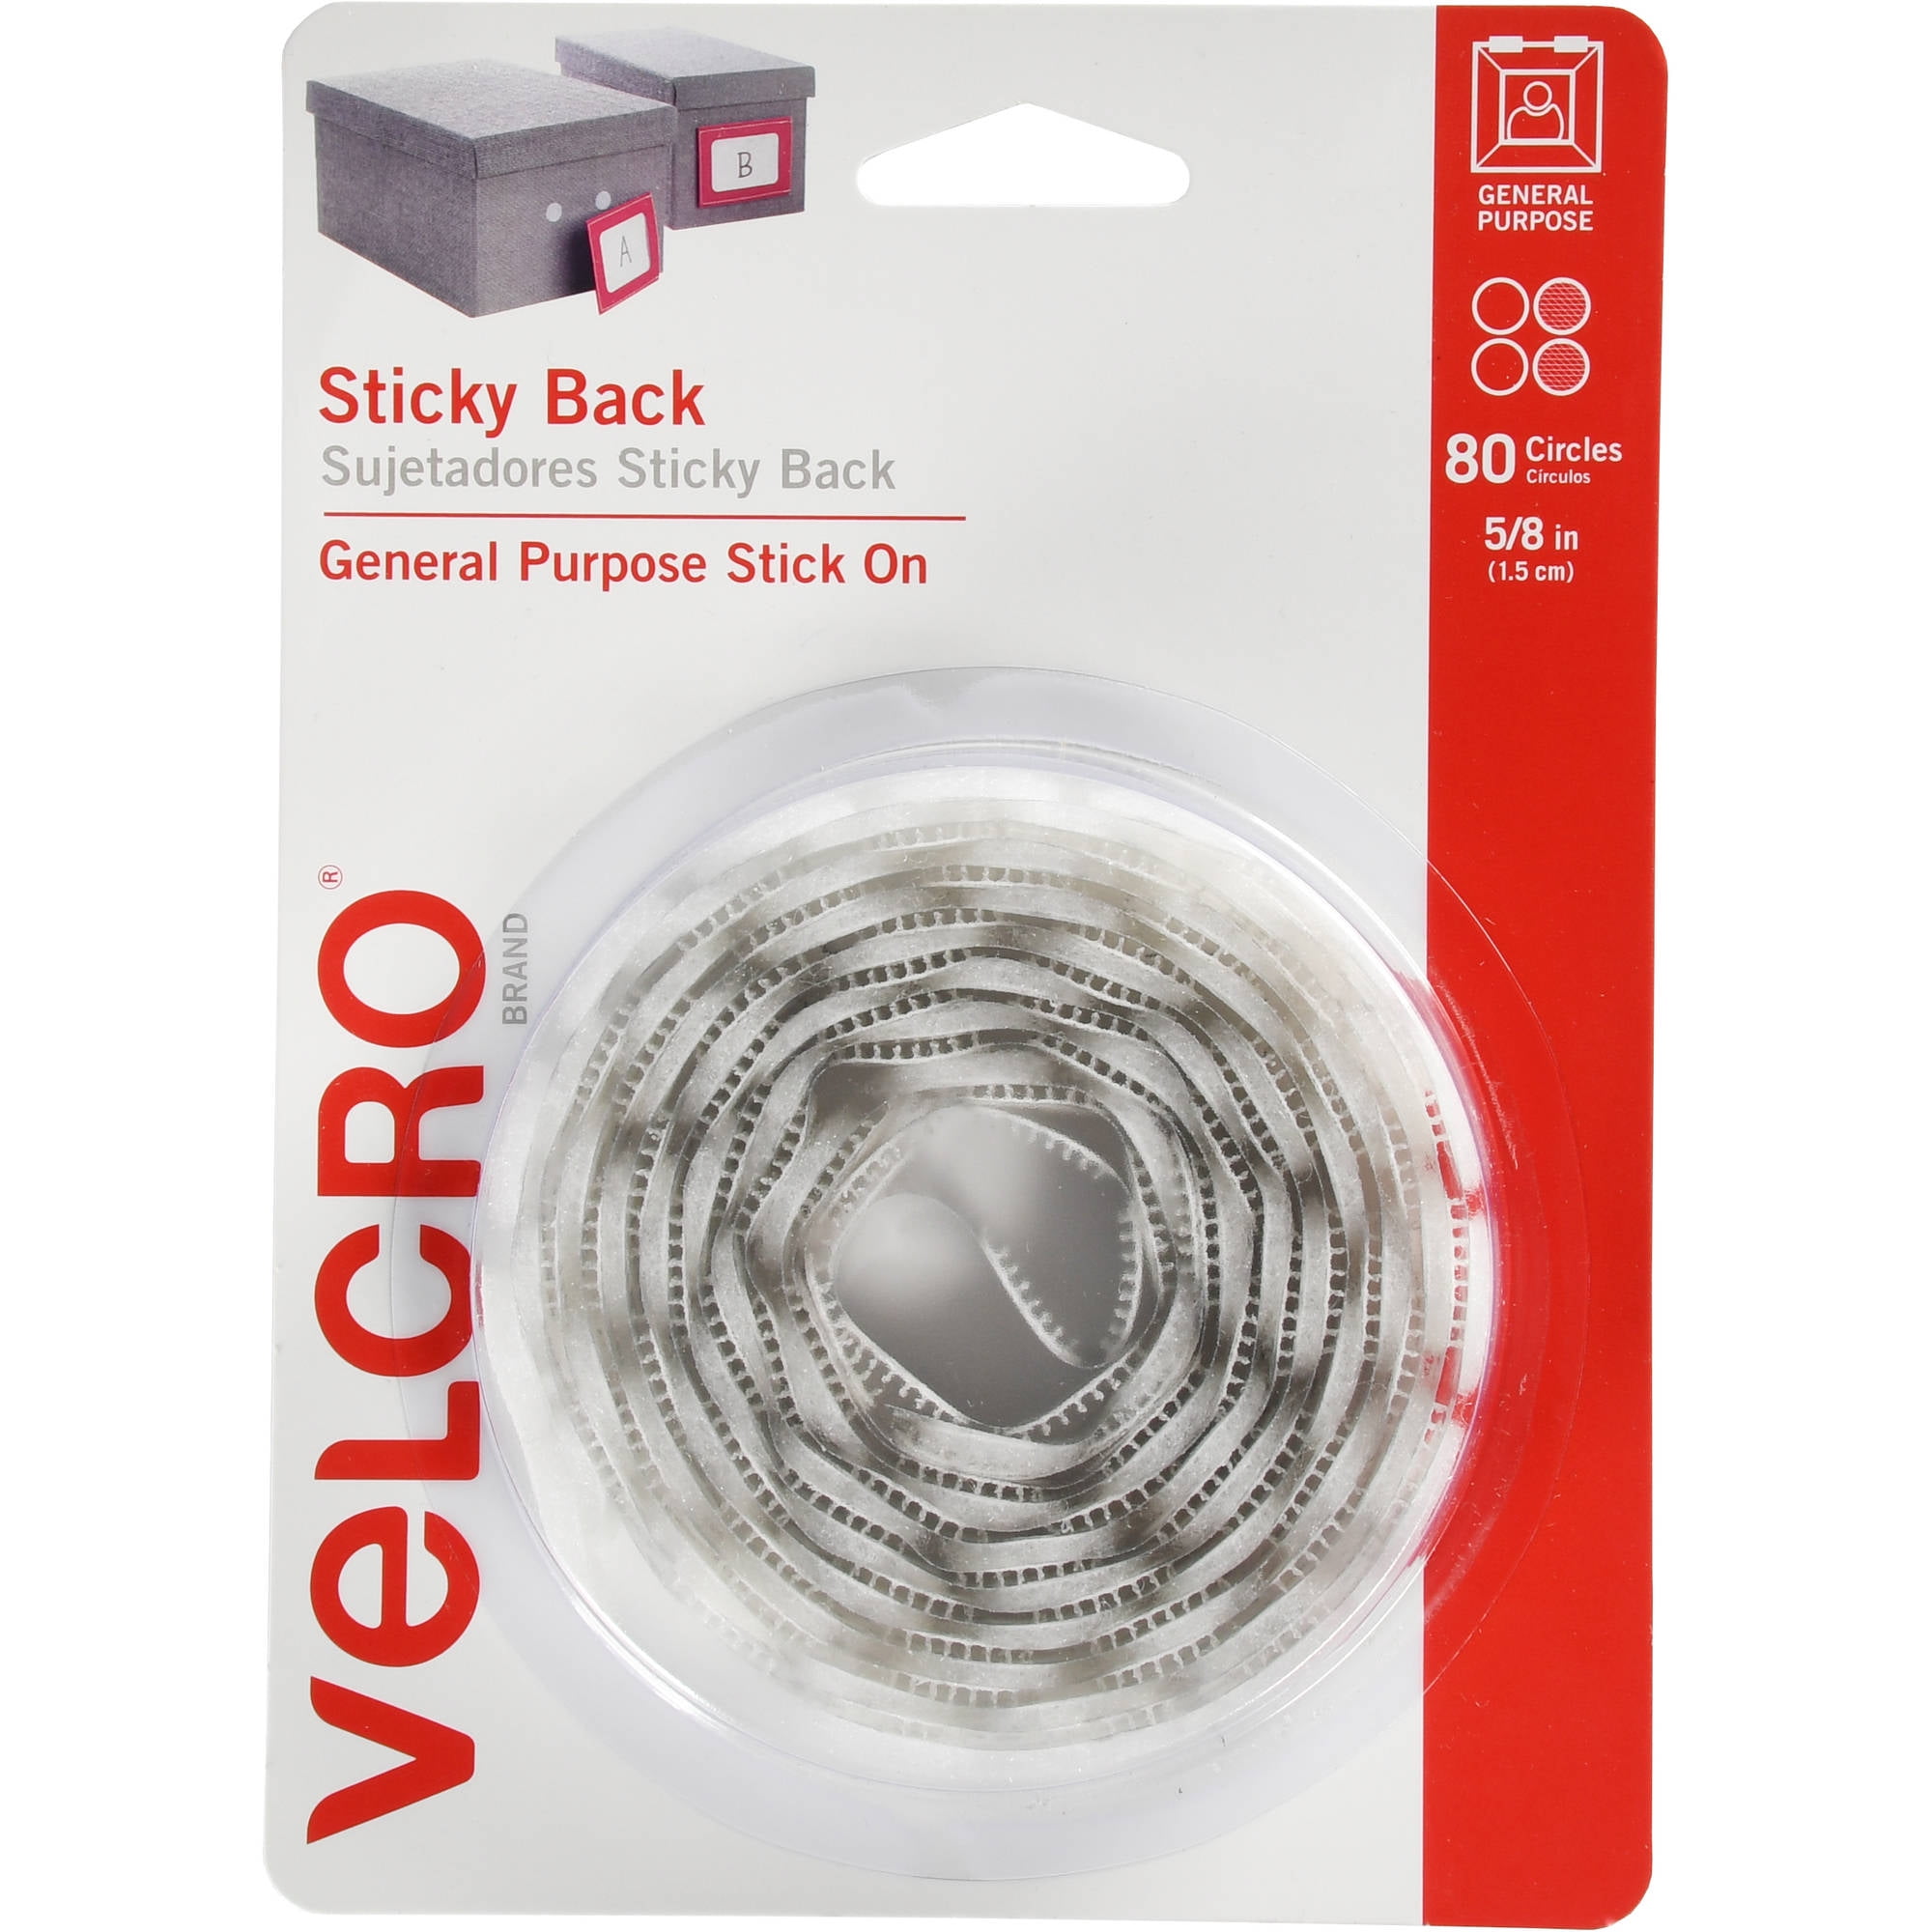 VELCRO Brand Dots with Adhesive White | Sticky Back Round Hook and Loop Closures for Organizing, Arts and Crafts, School Projects, 5/8in Circles 80 ct